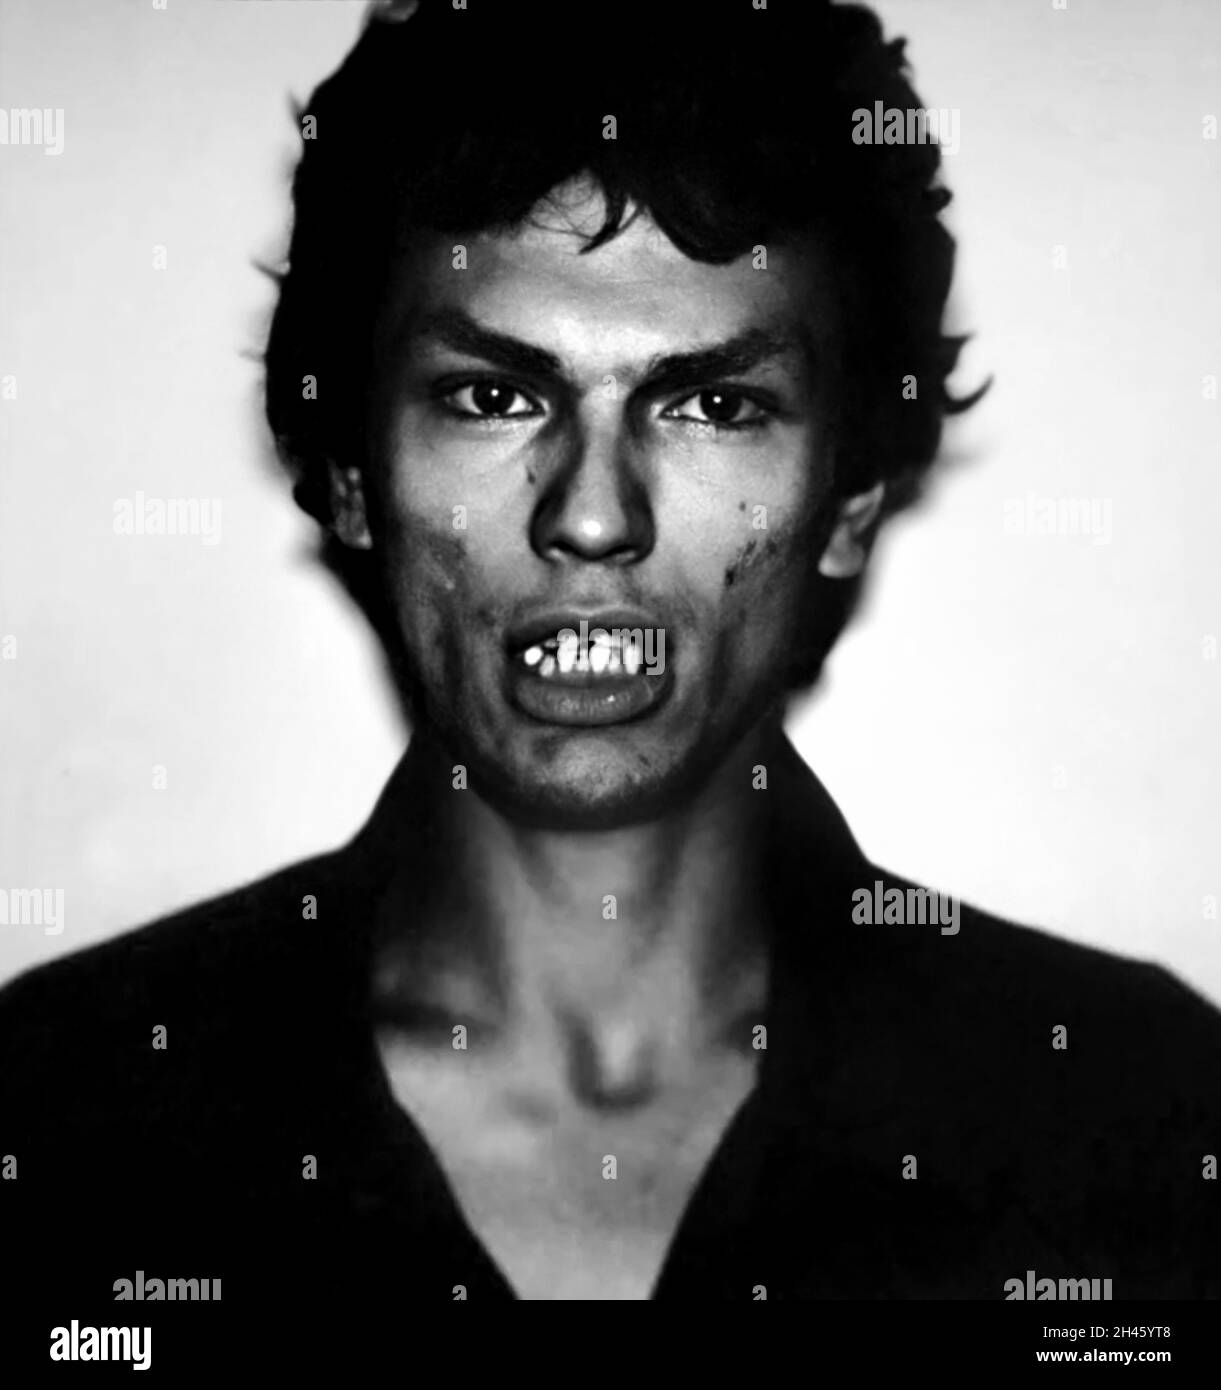 1985 , LOS ANGELES , USA : The Satanist serial killer RICHARD RAMIREZ ( 1960 - 2013 ), born Ricardo Leyva Munoz Ramírez , when was arrested in a mugshot by Los Angeles Police Department . Ramirez ' The Night Stalker ' was  also serial rapist , kidnapper , child molester and burglar , was an American spree killer who murdered at least 13 people , from 17 march to 31 august 1985  . Unknown photographer .- MUG SHOT - MUG-SHOT - SERIAL KILLER  - portrait - ritratto - serial-killer - assassino seriale - CRONACA NERA - criminale - criminal - SERIAL KILLER  - foto segnaletica della Polizia - ugly bum Stock Photo